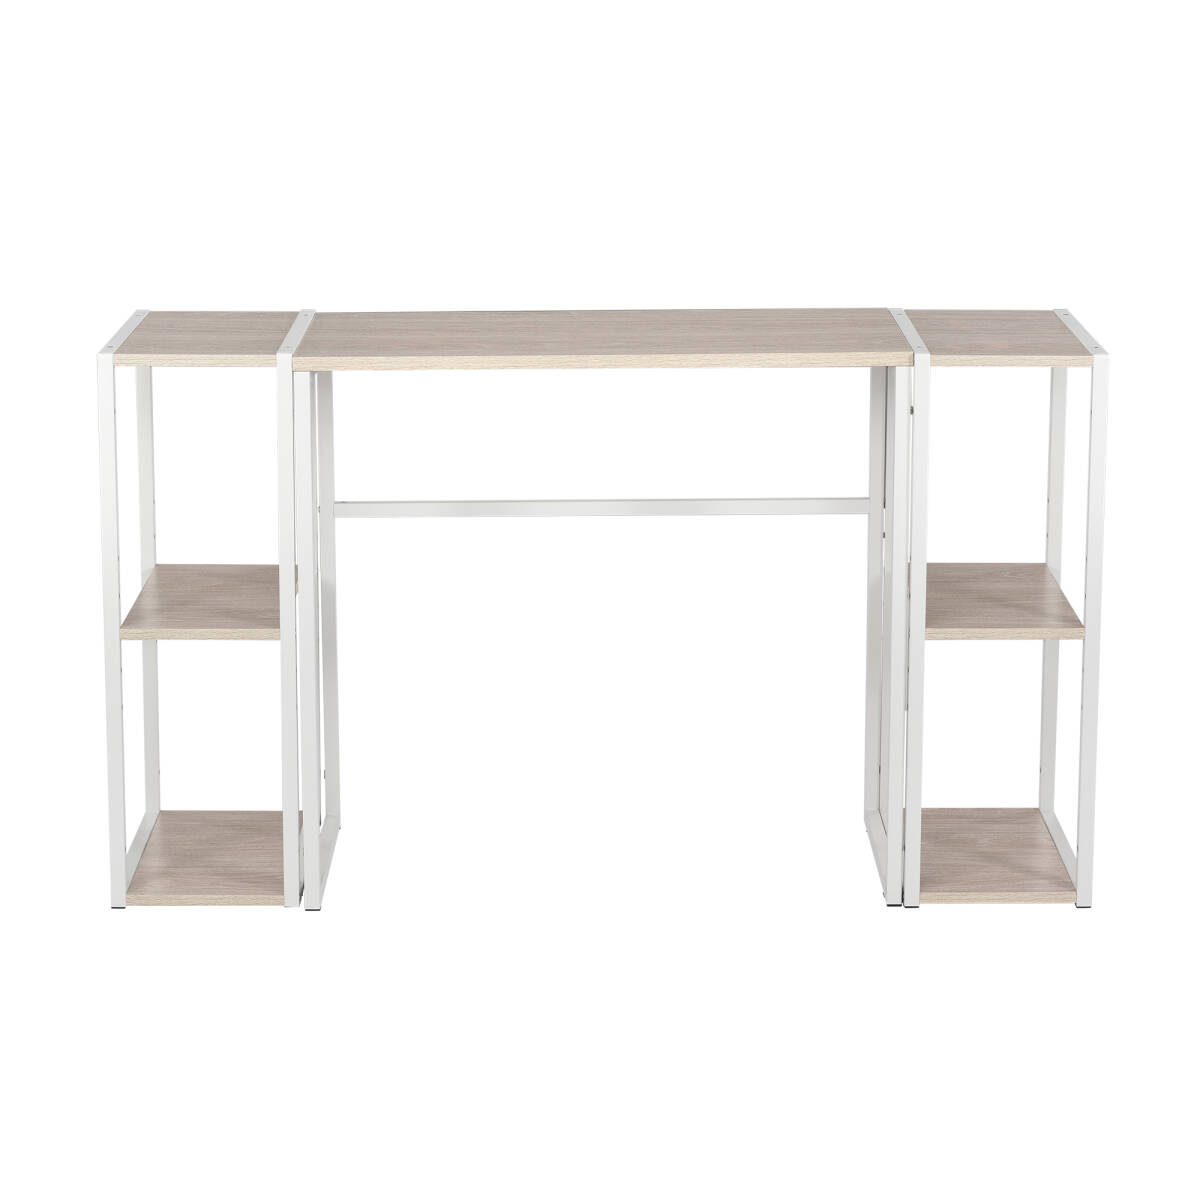 [ new goods appearance ]H type computer desk storage rack 2 piece attaching office desk comfortably . combination possibility wooden sewing machine pcs [ white ] E641